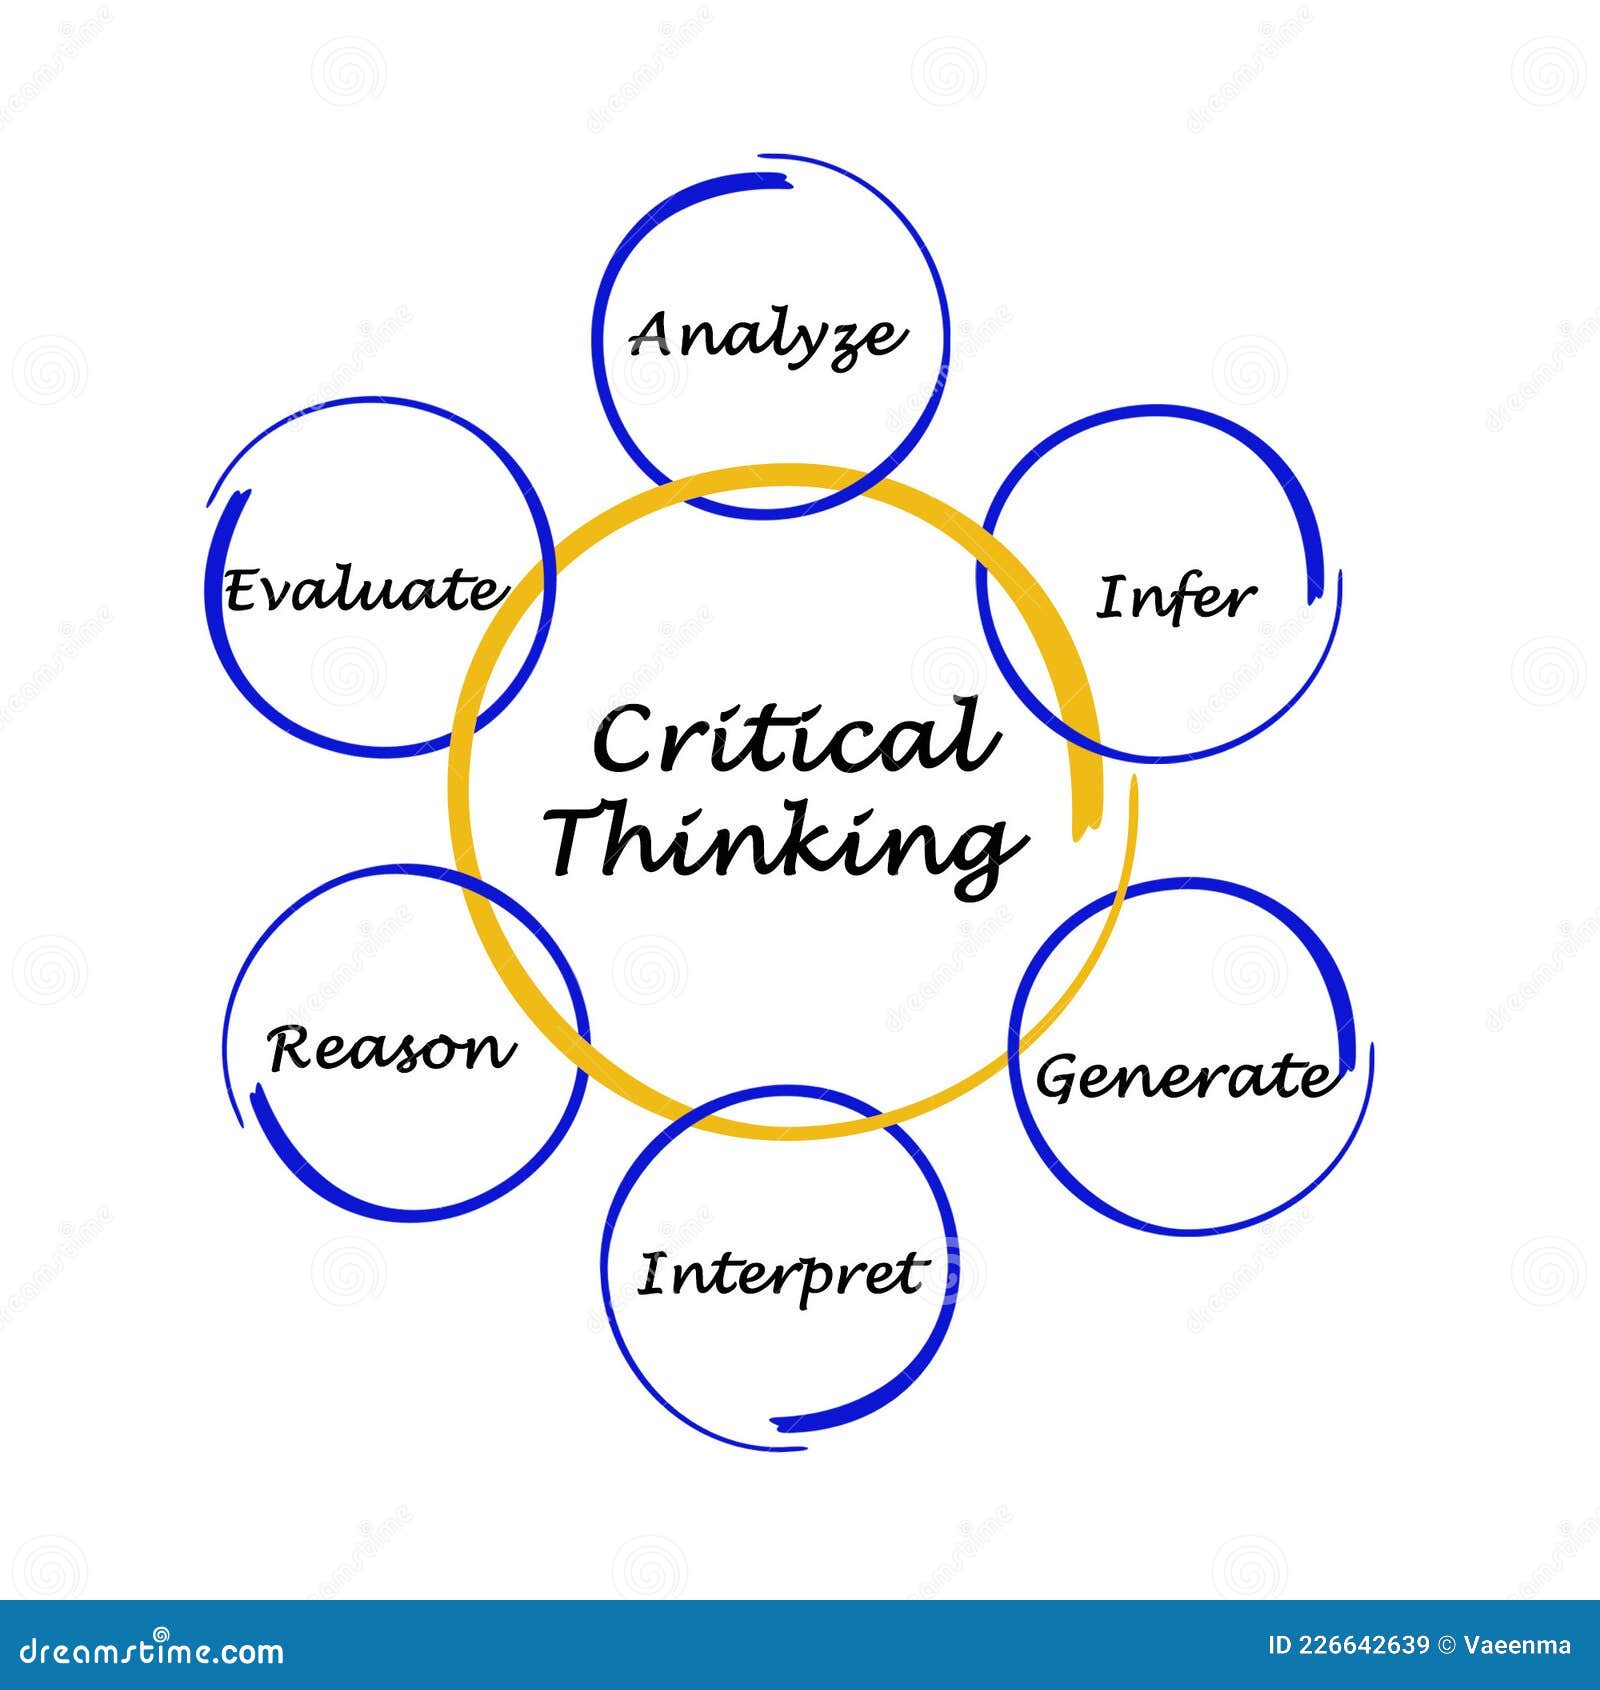 3 central components of scientific and critical thinking